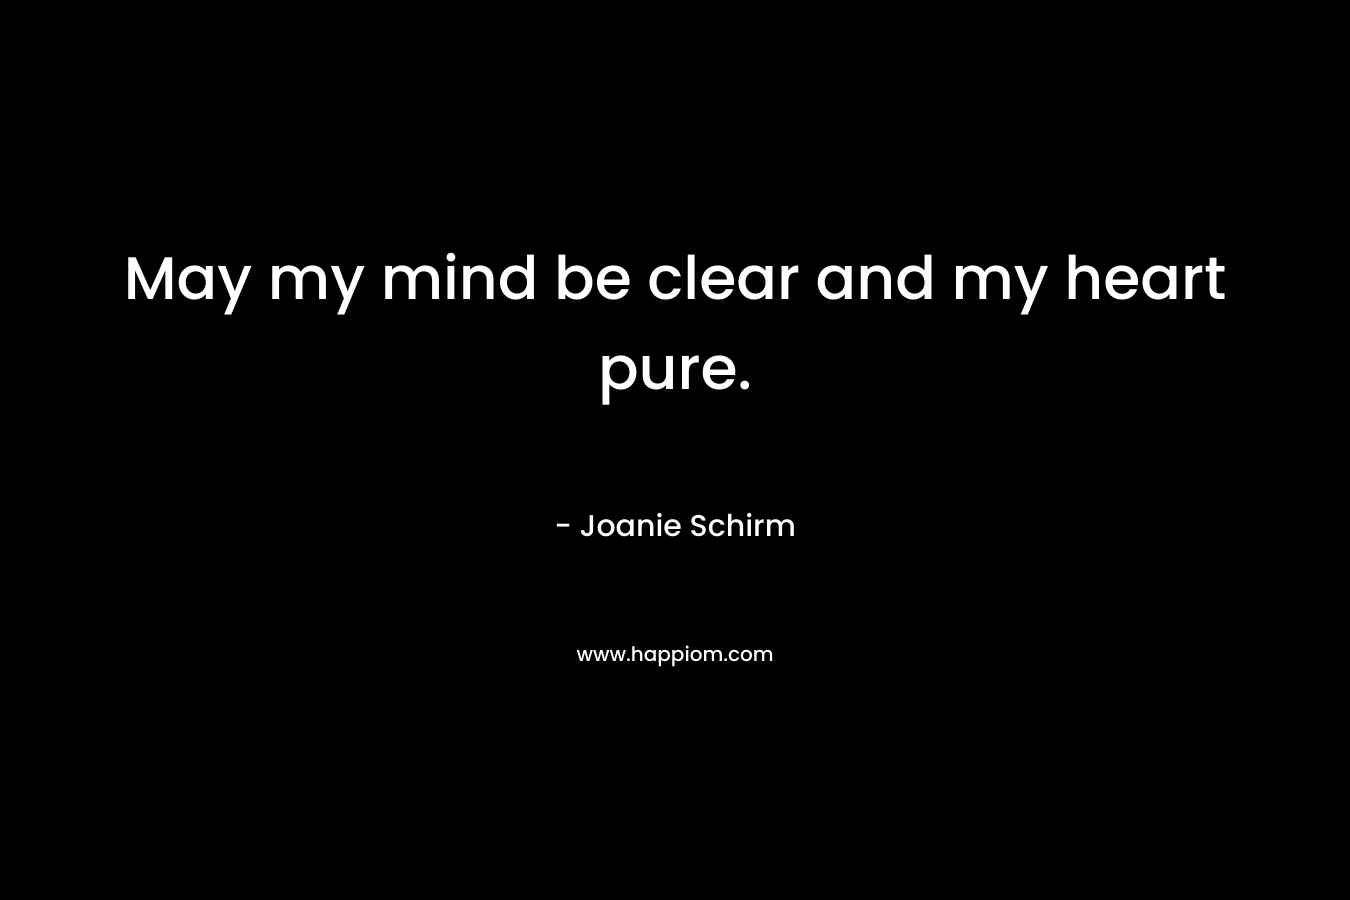 May my mind be clear and my heart pure. – Joanie Schirm